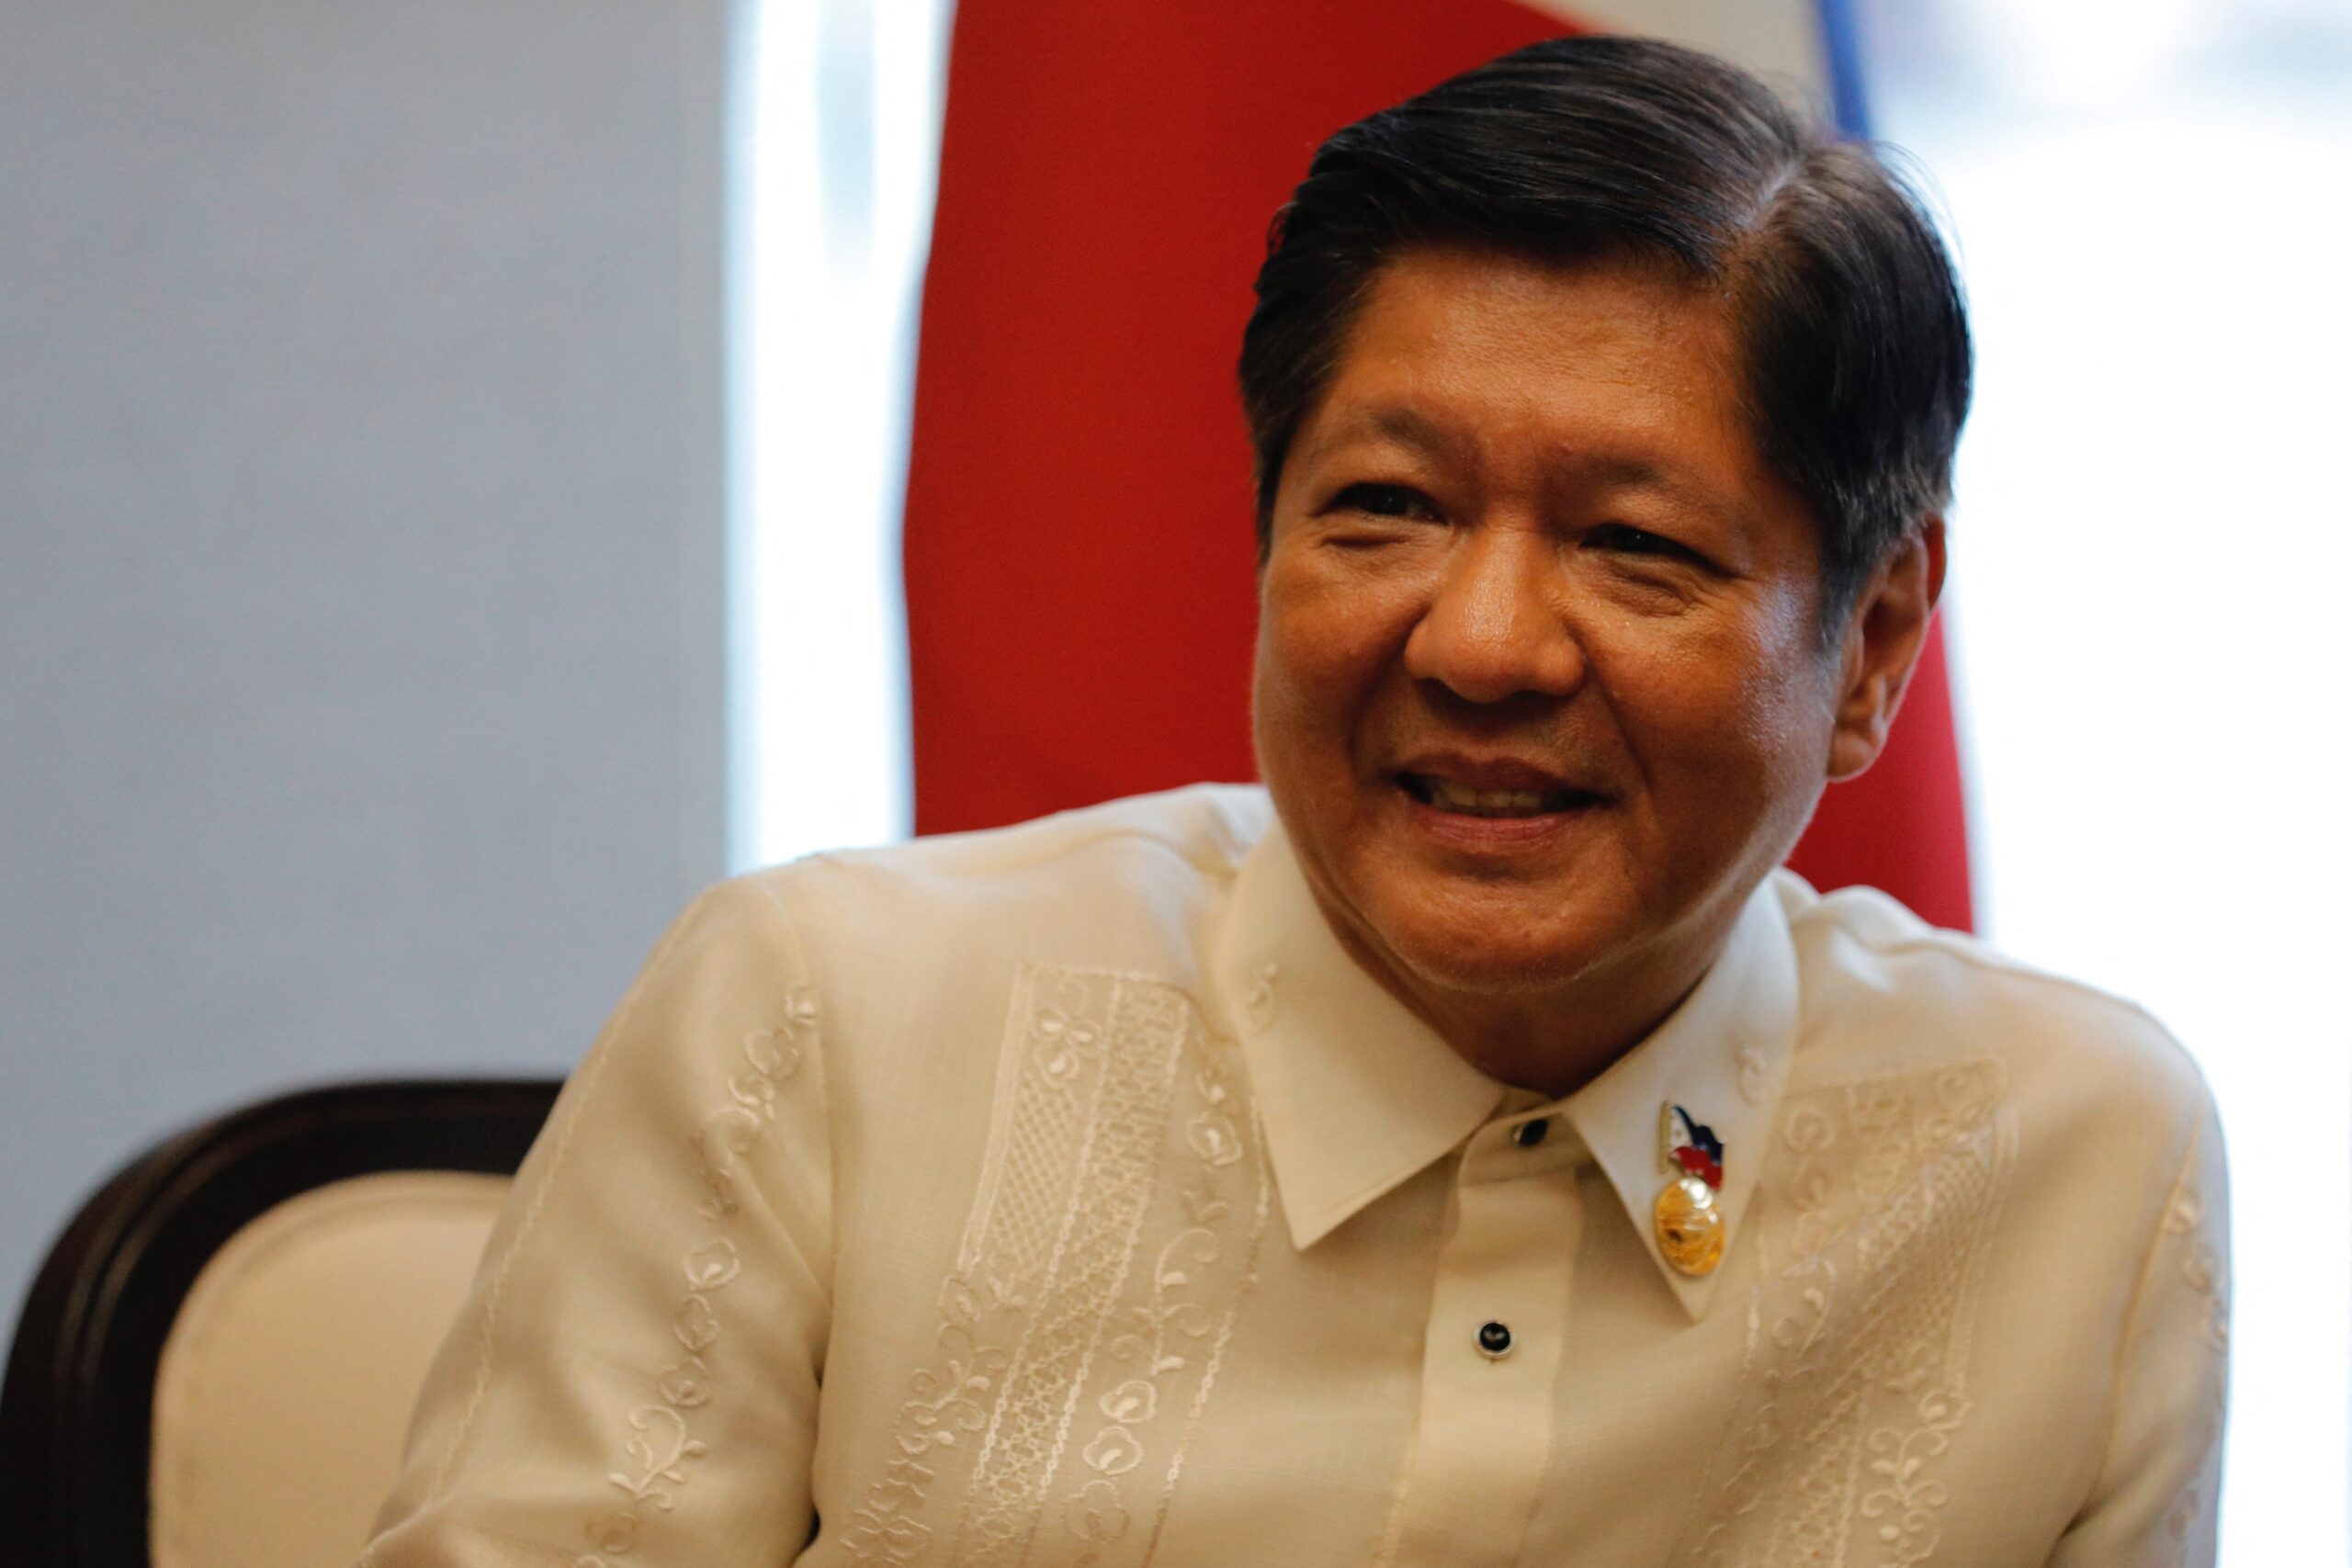 Bongbong Marcos is set to make his 3rd trip as president to the United States in November 2023